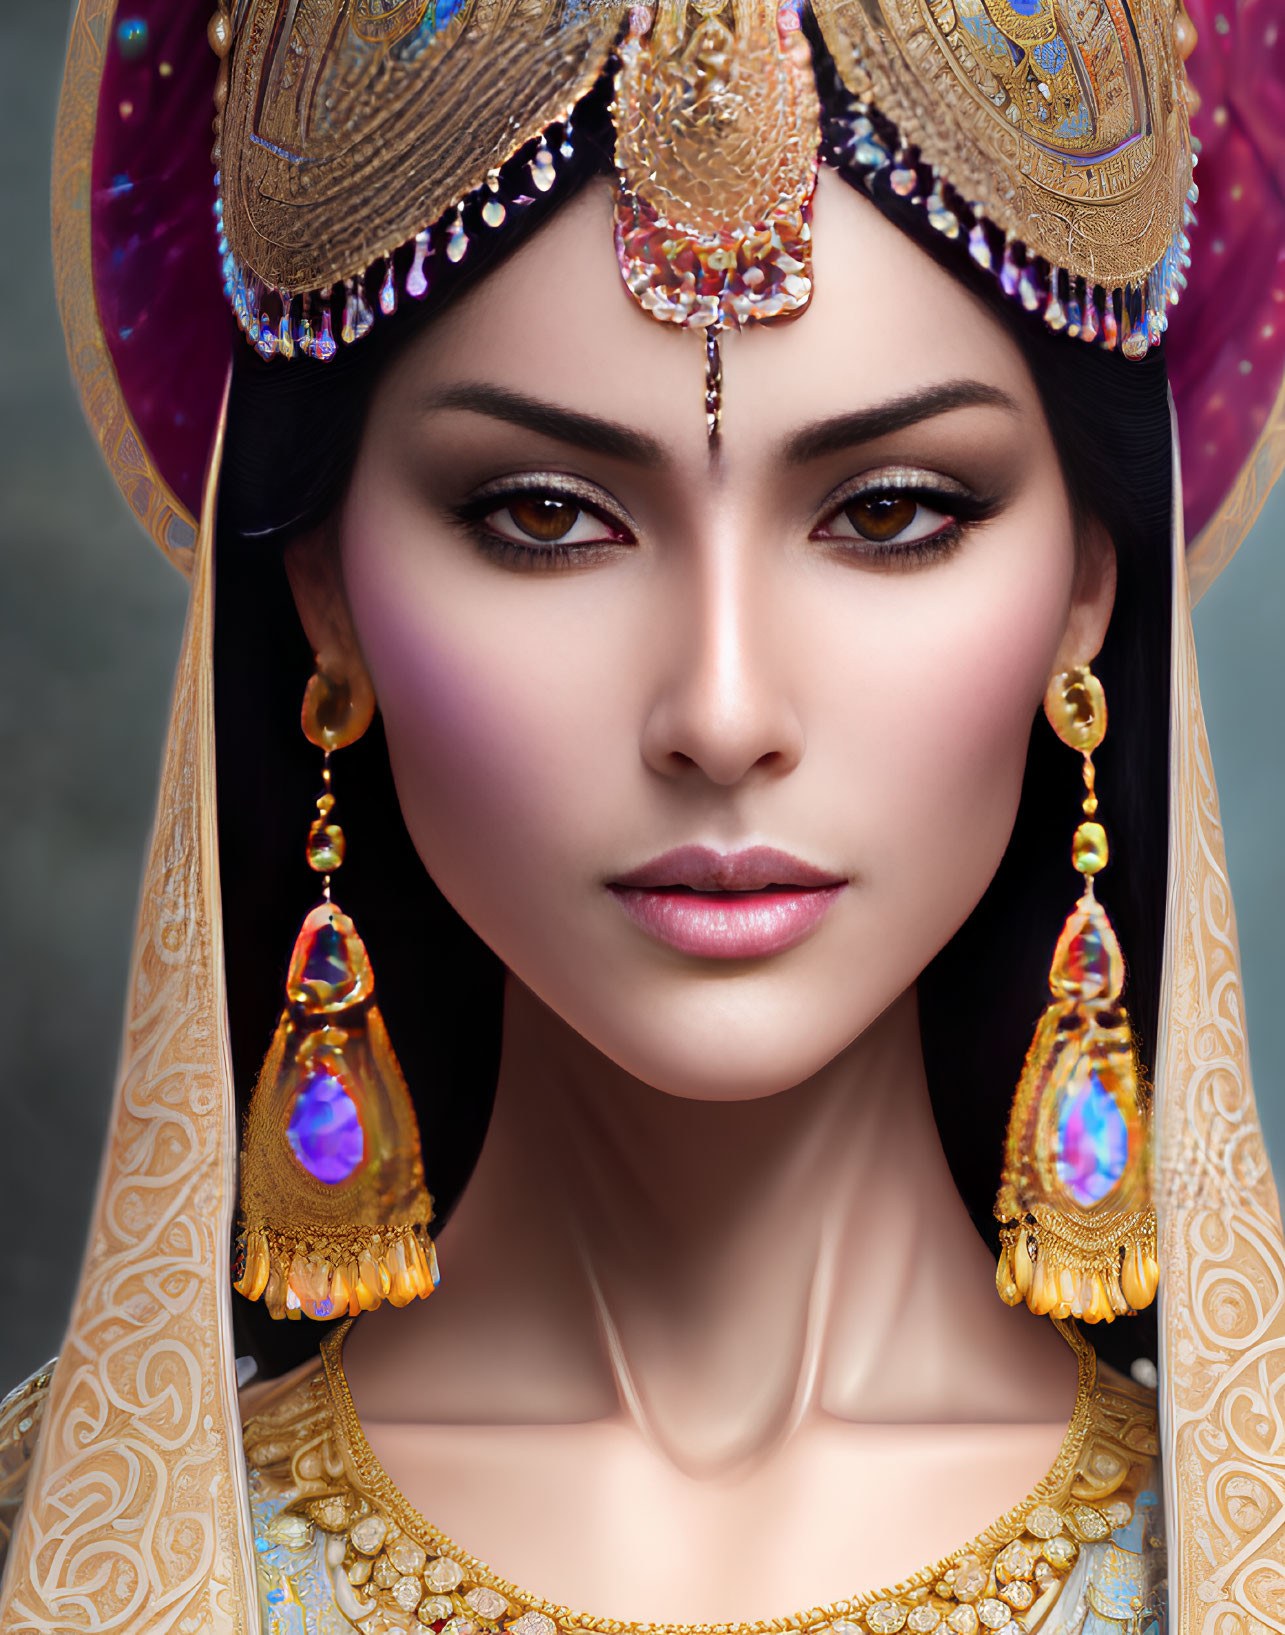 Detailed traditional headwear and jewelry on woman gazing forward